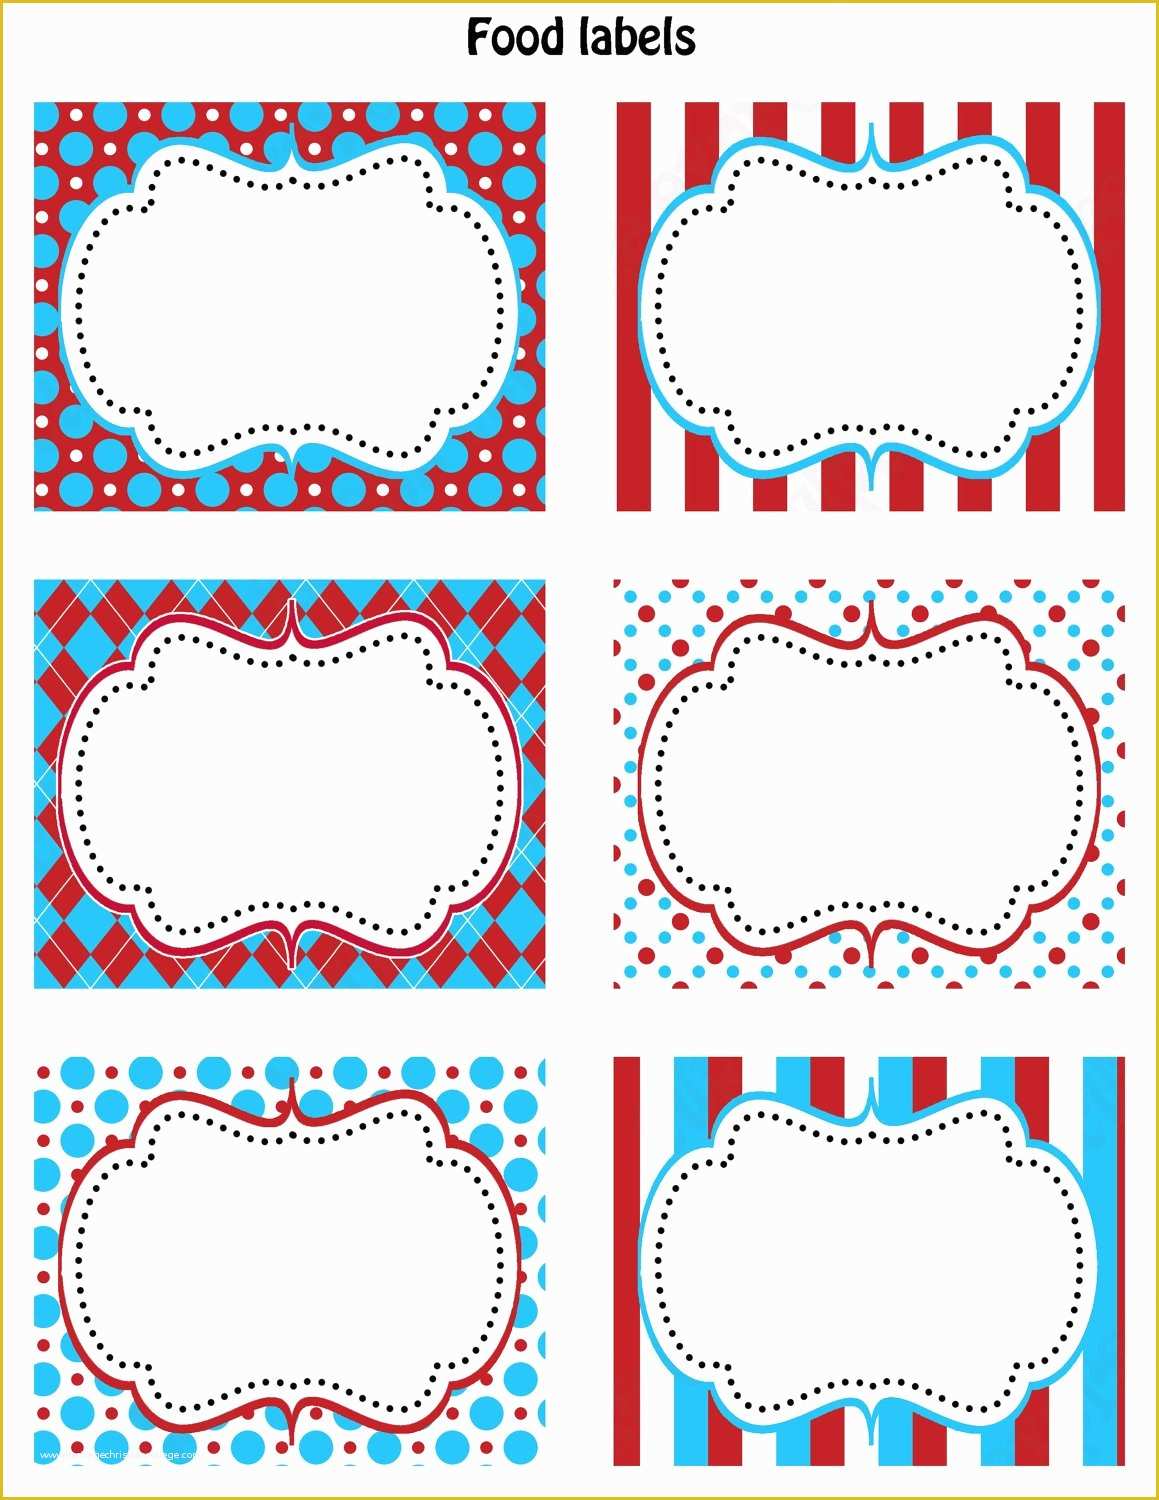 Free Printable Food Labels Templates Of Dr Seuss Inspired 1st Birthday Party Printable Food 